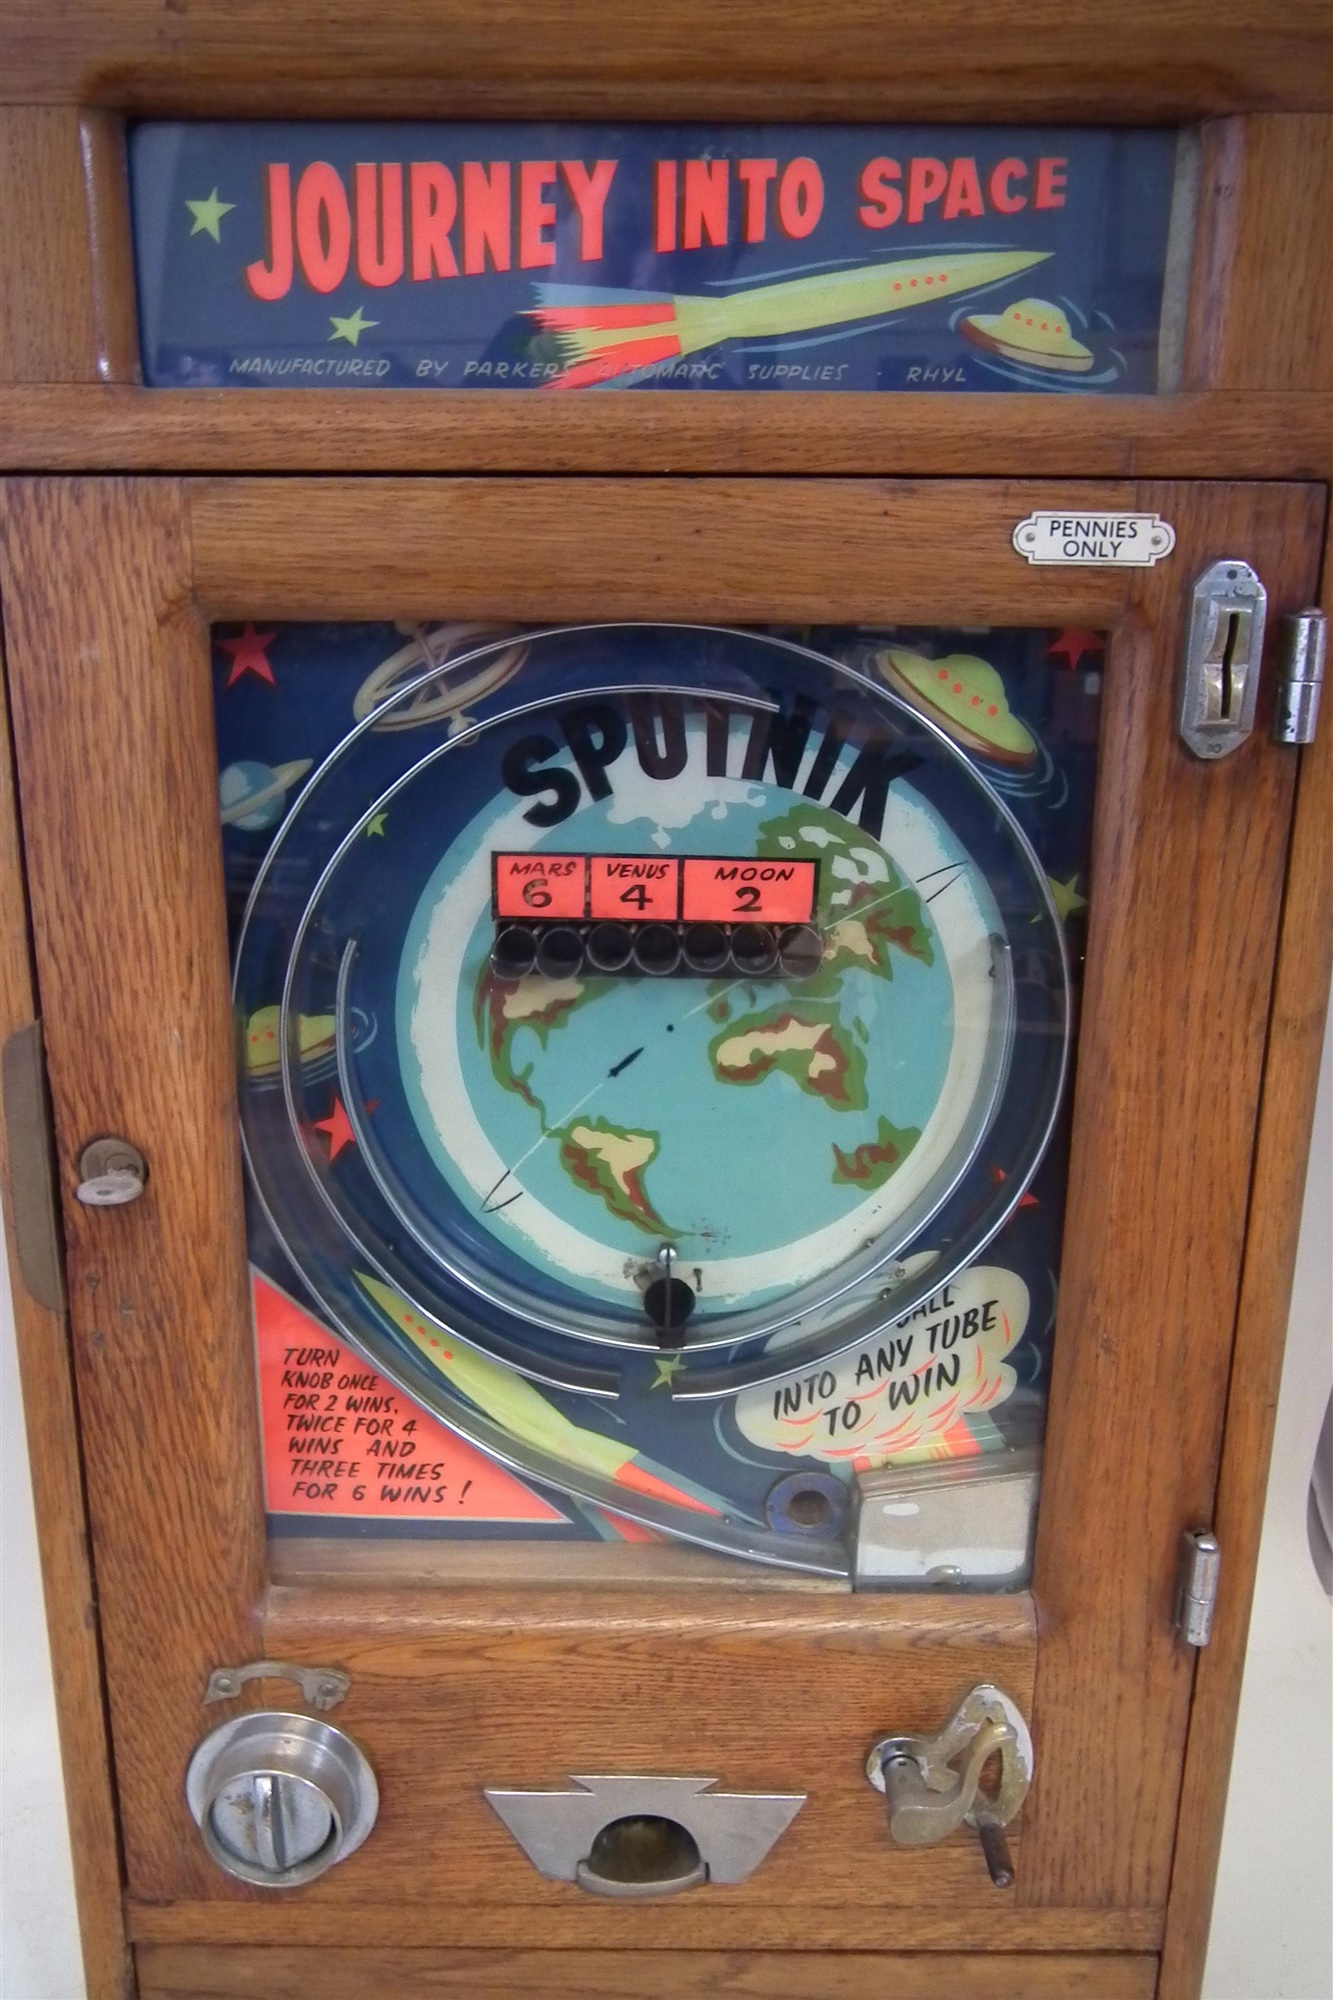 Parkers Automatic Supplies 'Journey into Space' penny slot pinball machine, seven hole game, with - Image 4 of 11